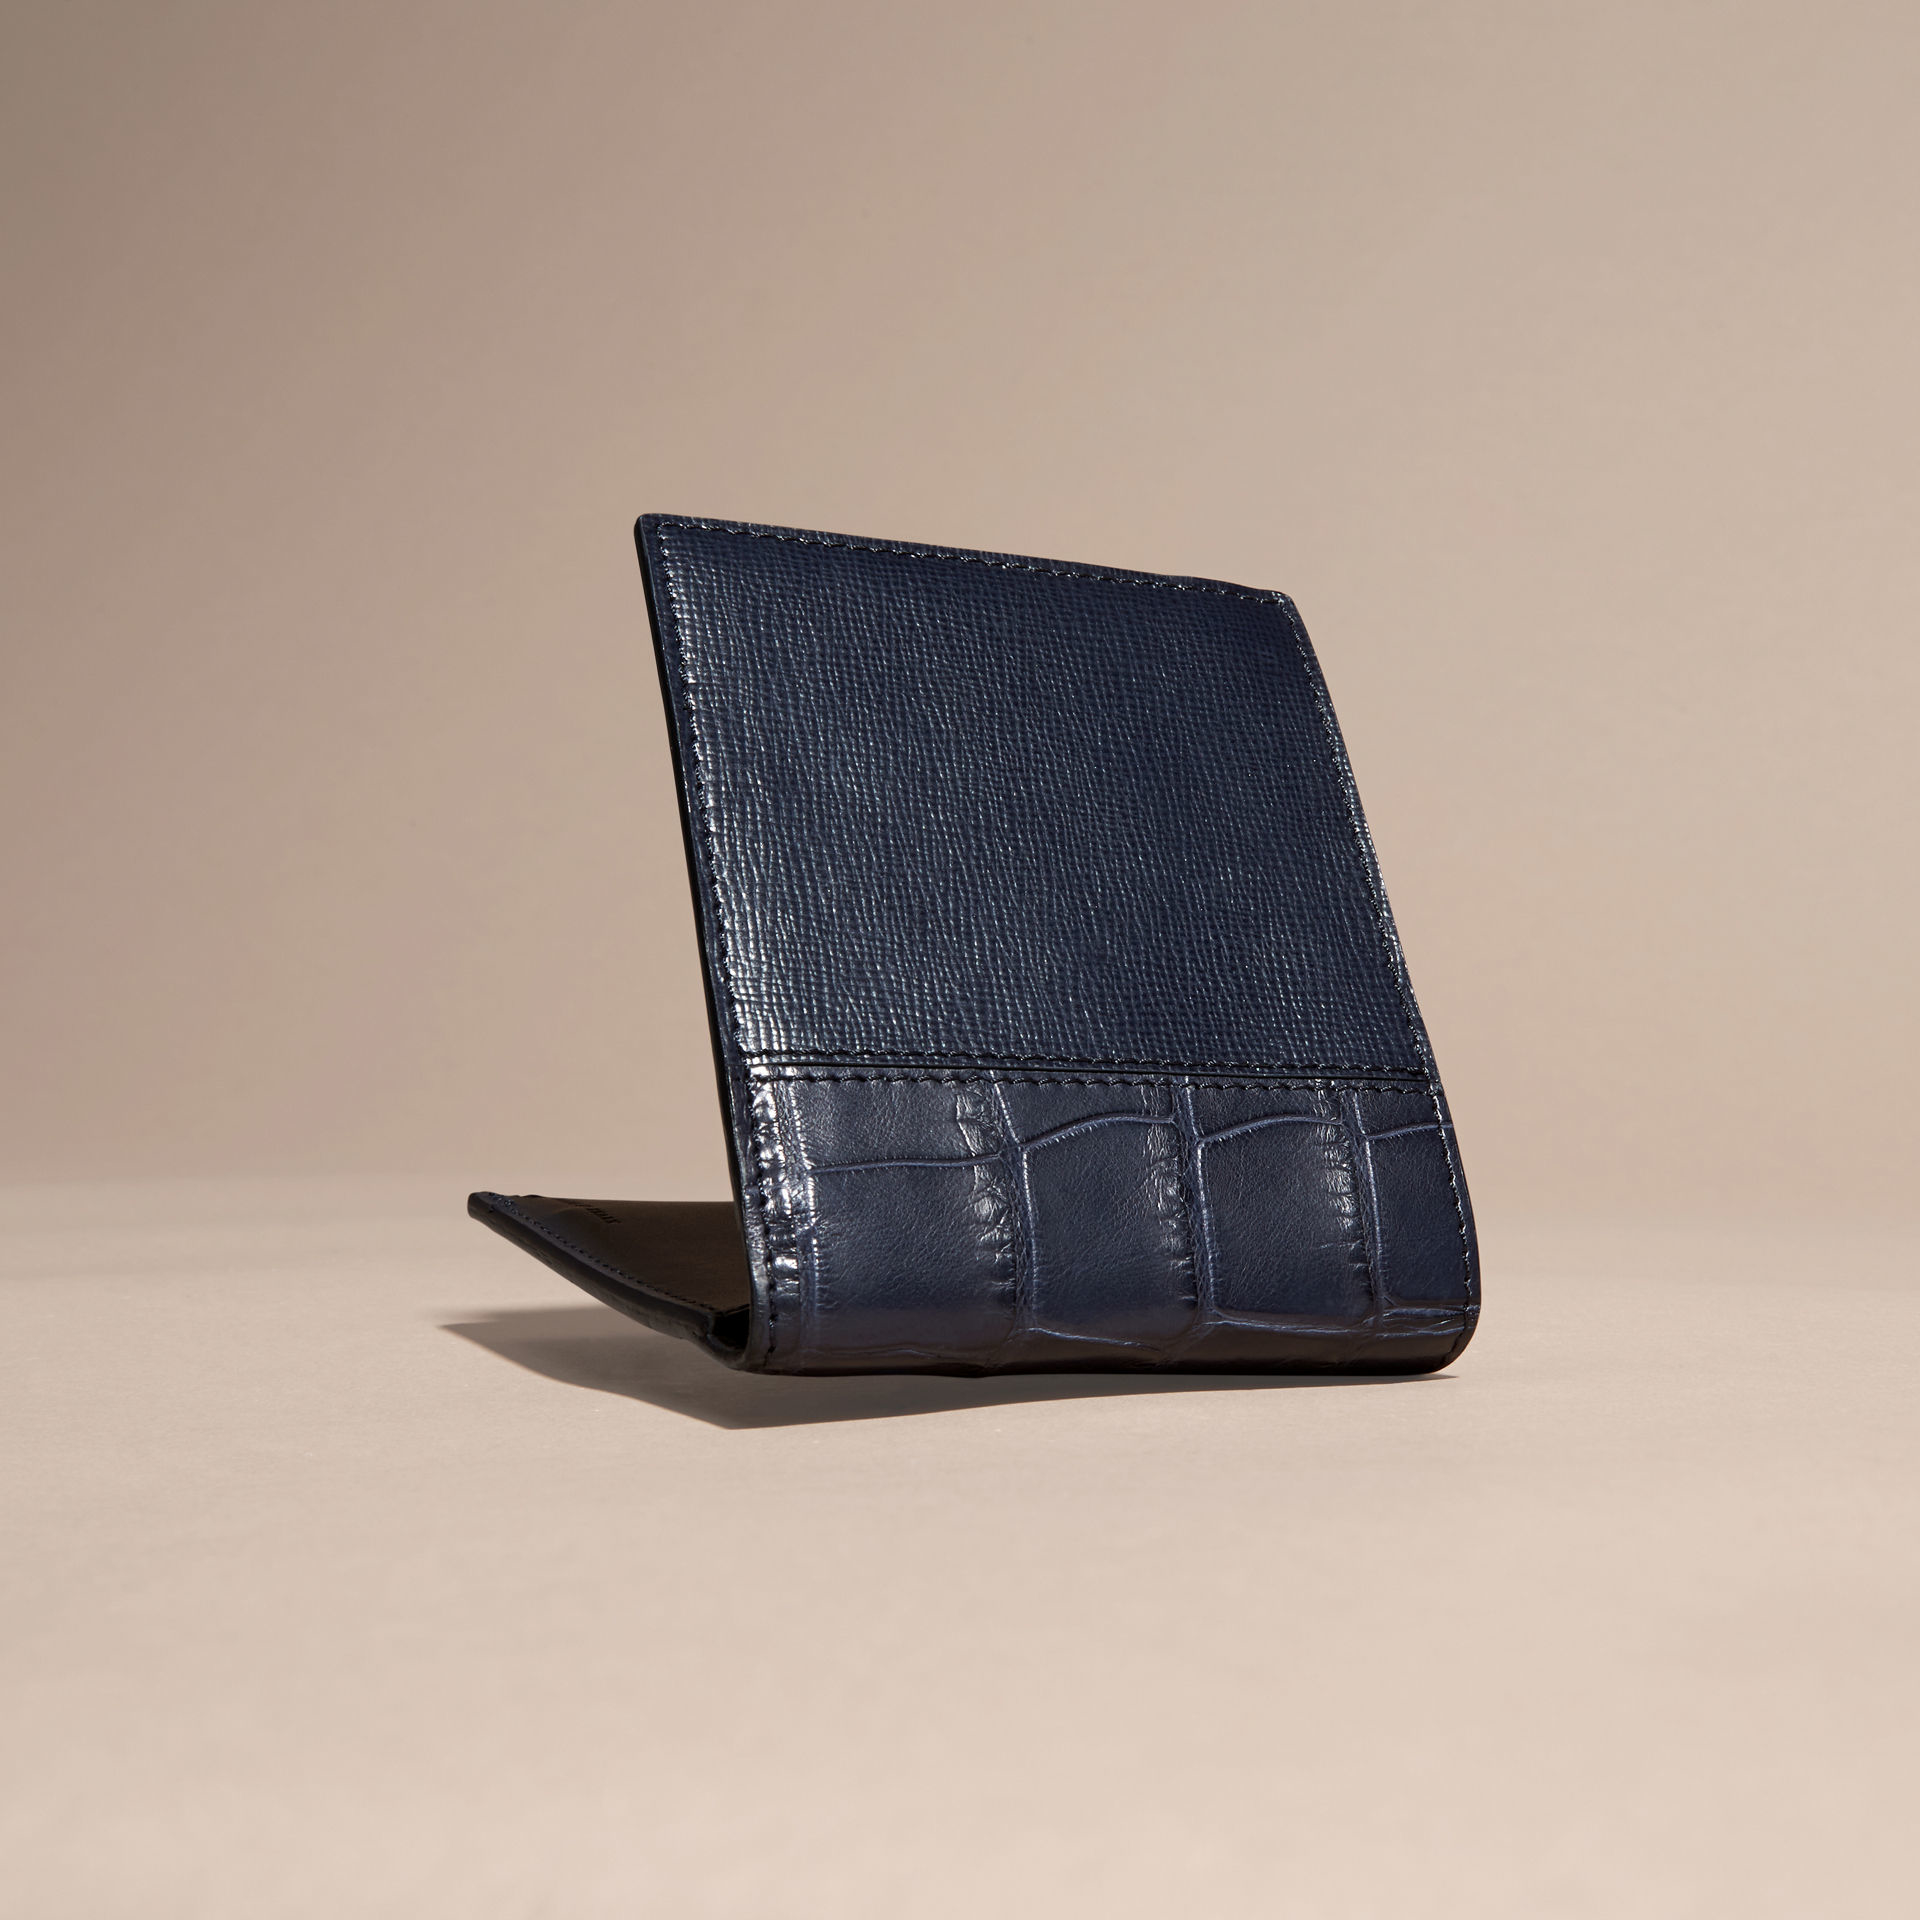 Burberry London Leather And Alligator Folding Wallet Dark Navy in Blue